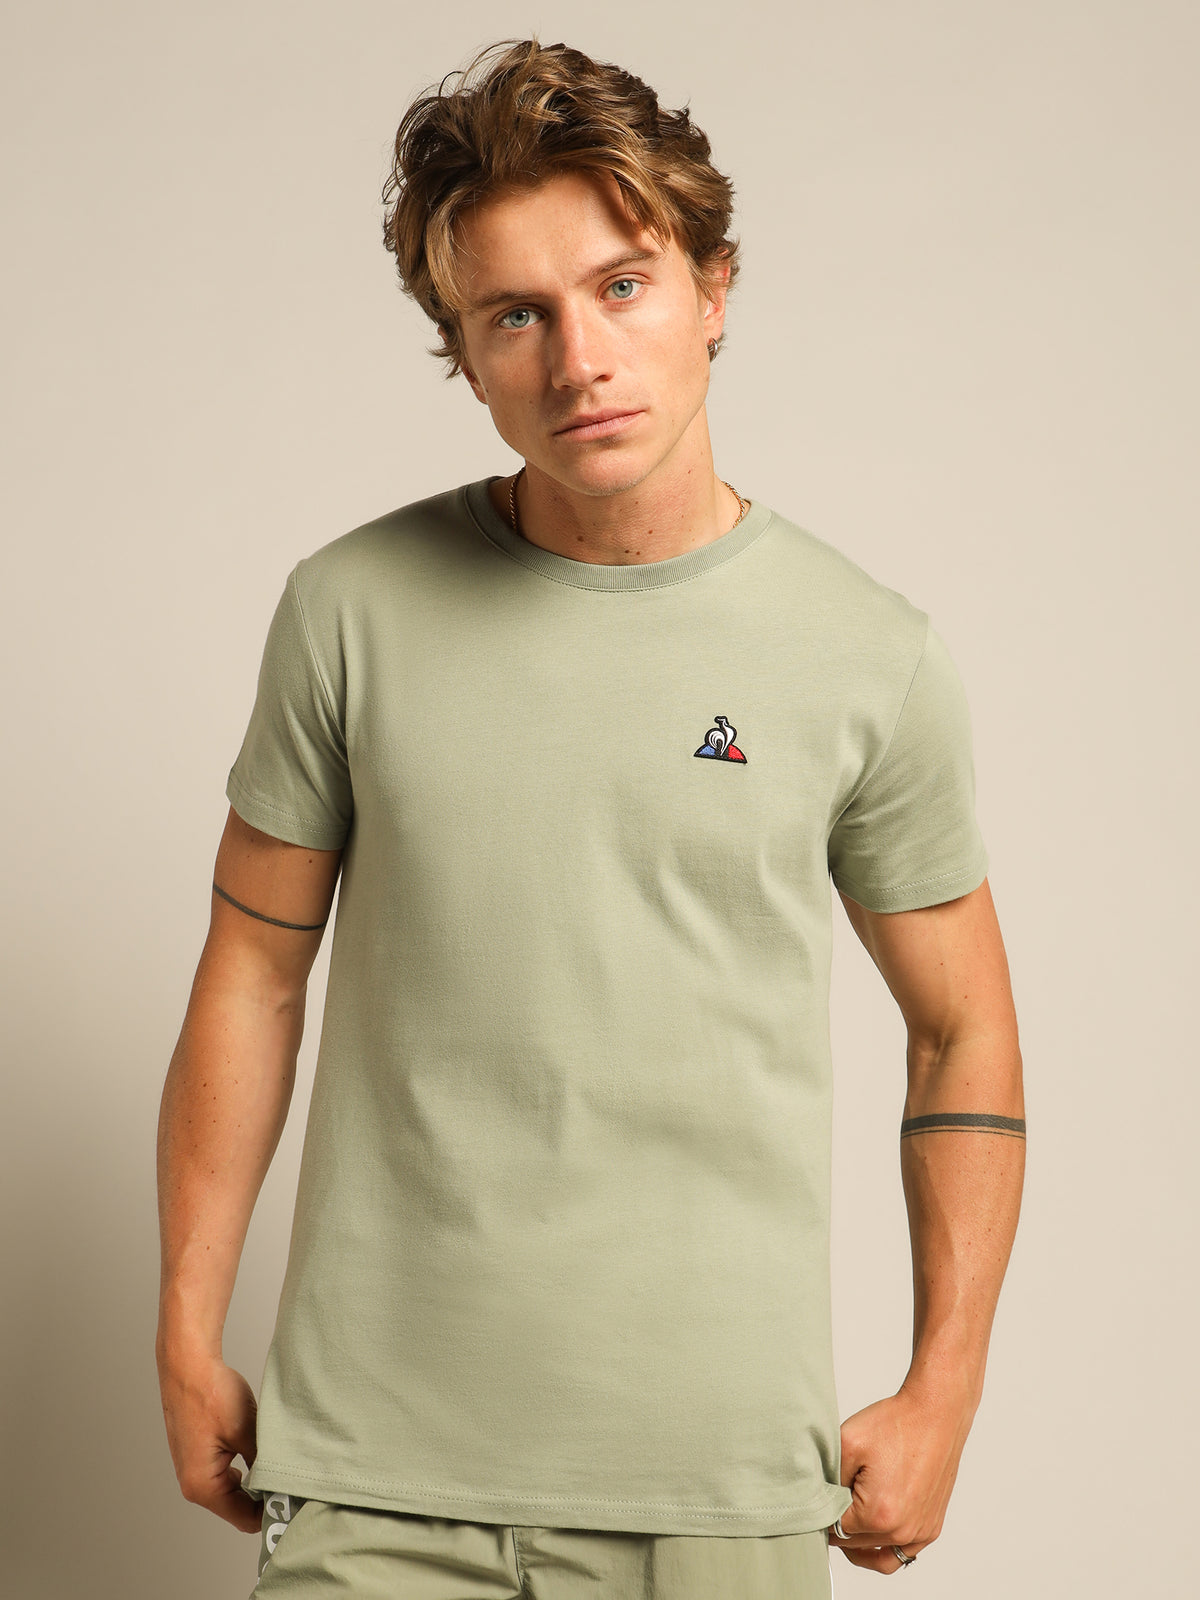 Victor T-Shirt in Sage